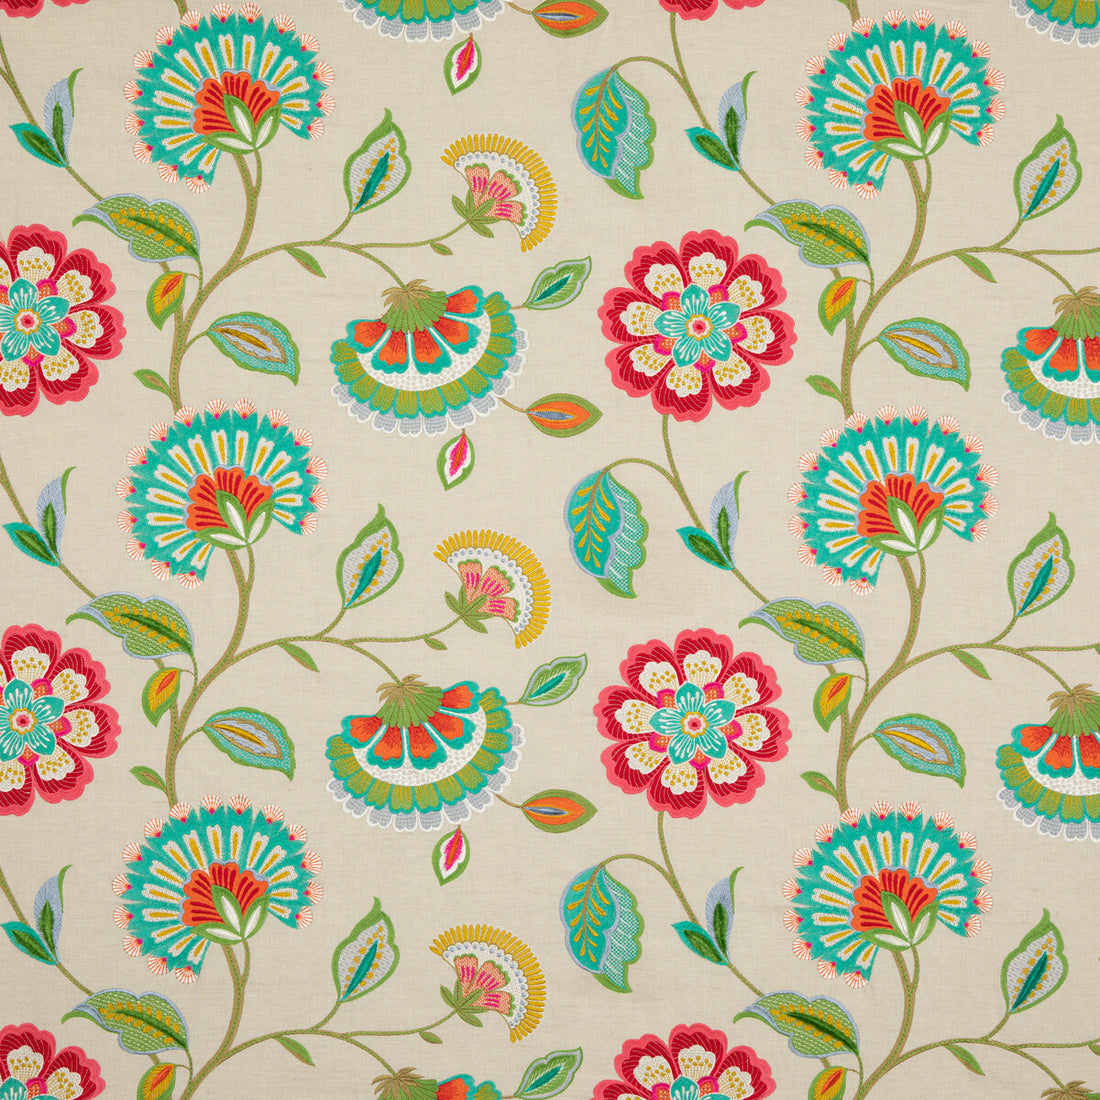 Scentsational fabric in multi color - pattern PF50463.1.0 - by Baker Lifestyle in the Fiesta collection